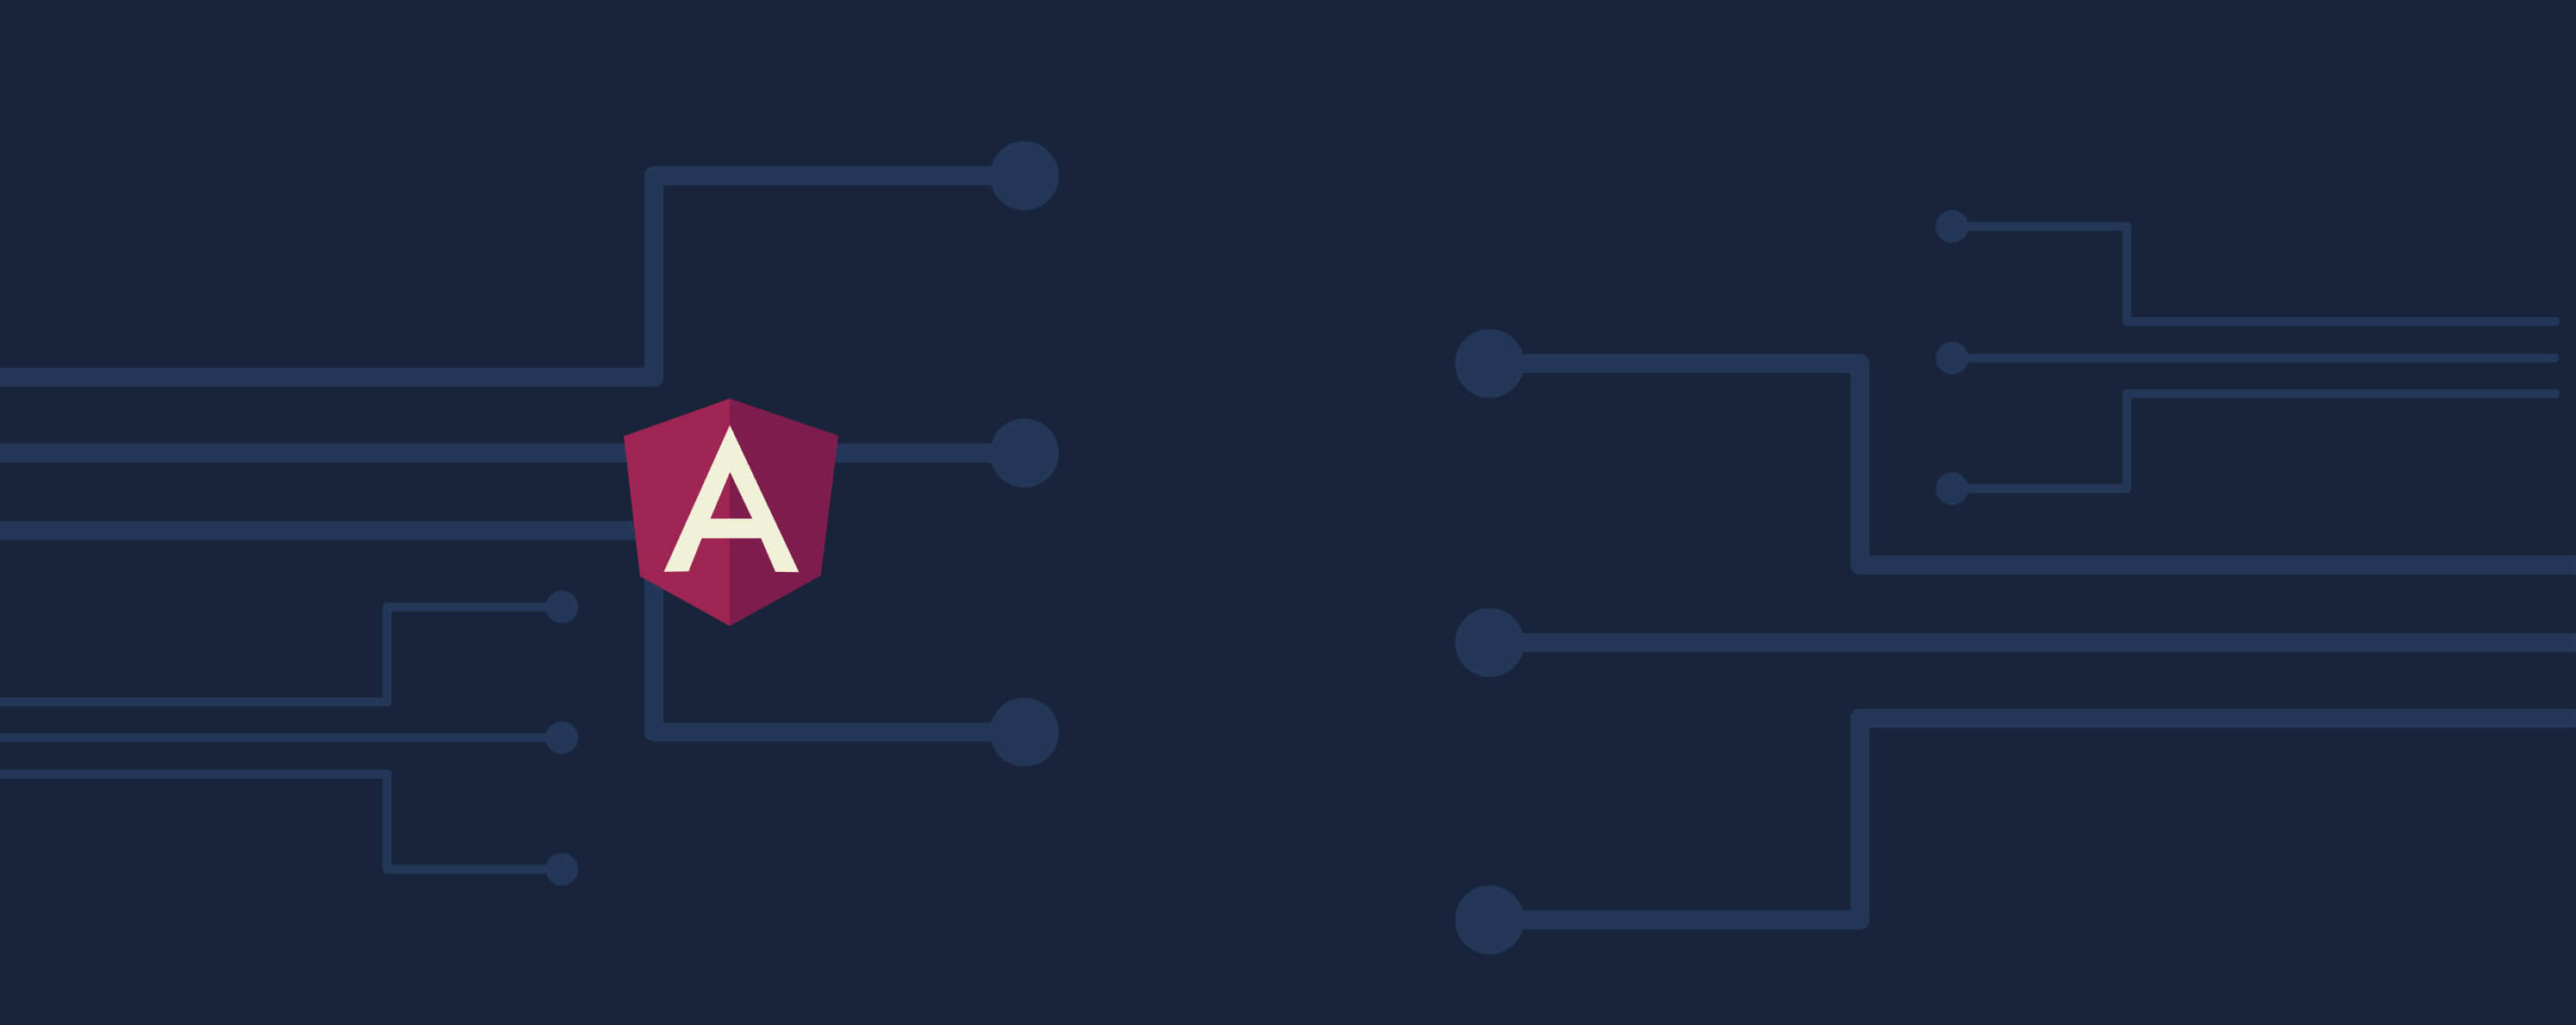 ngx-bootstrap: Angular Ivy is here